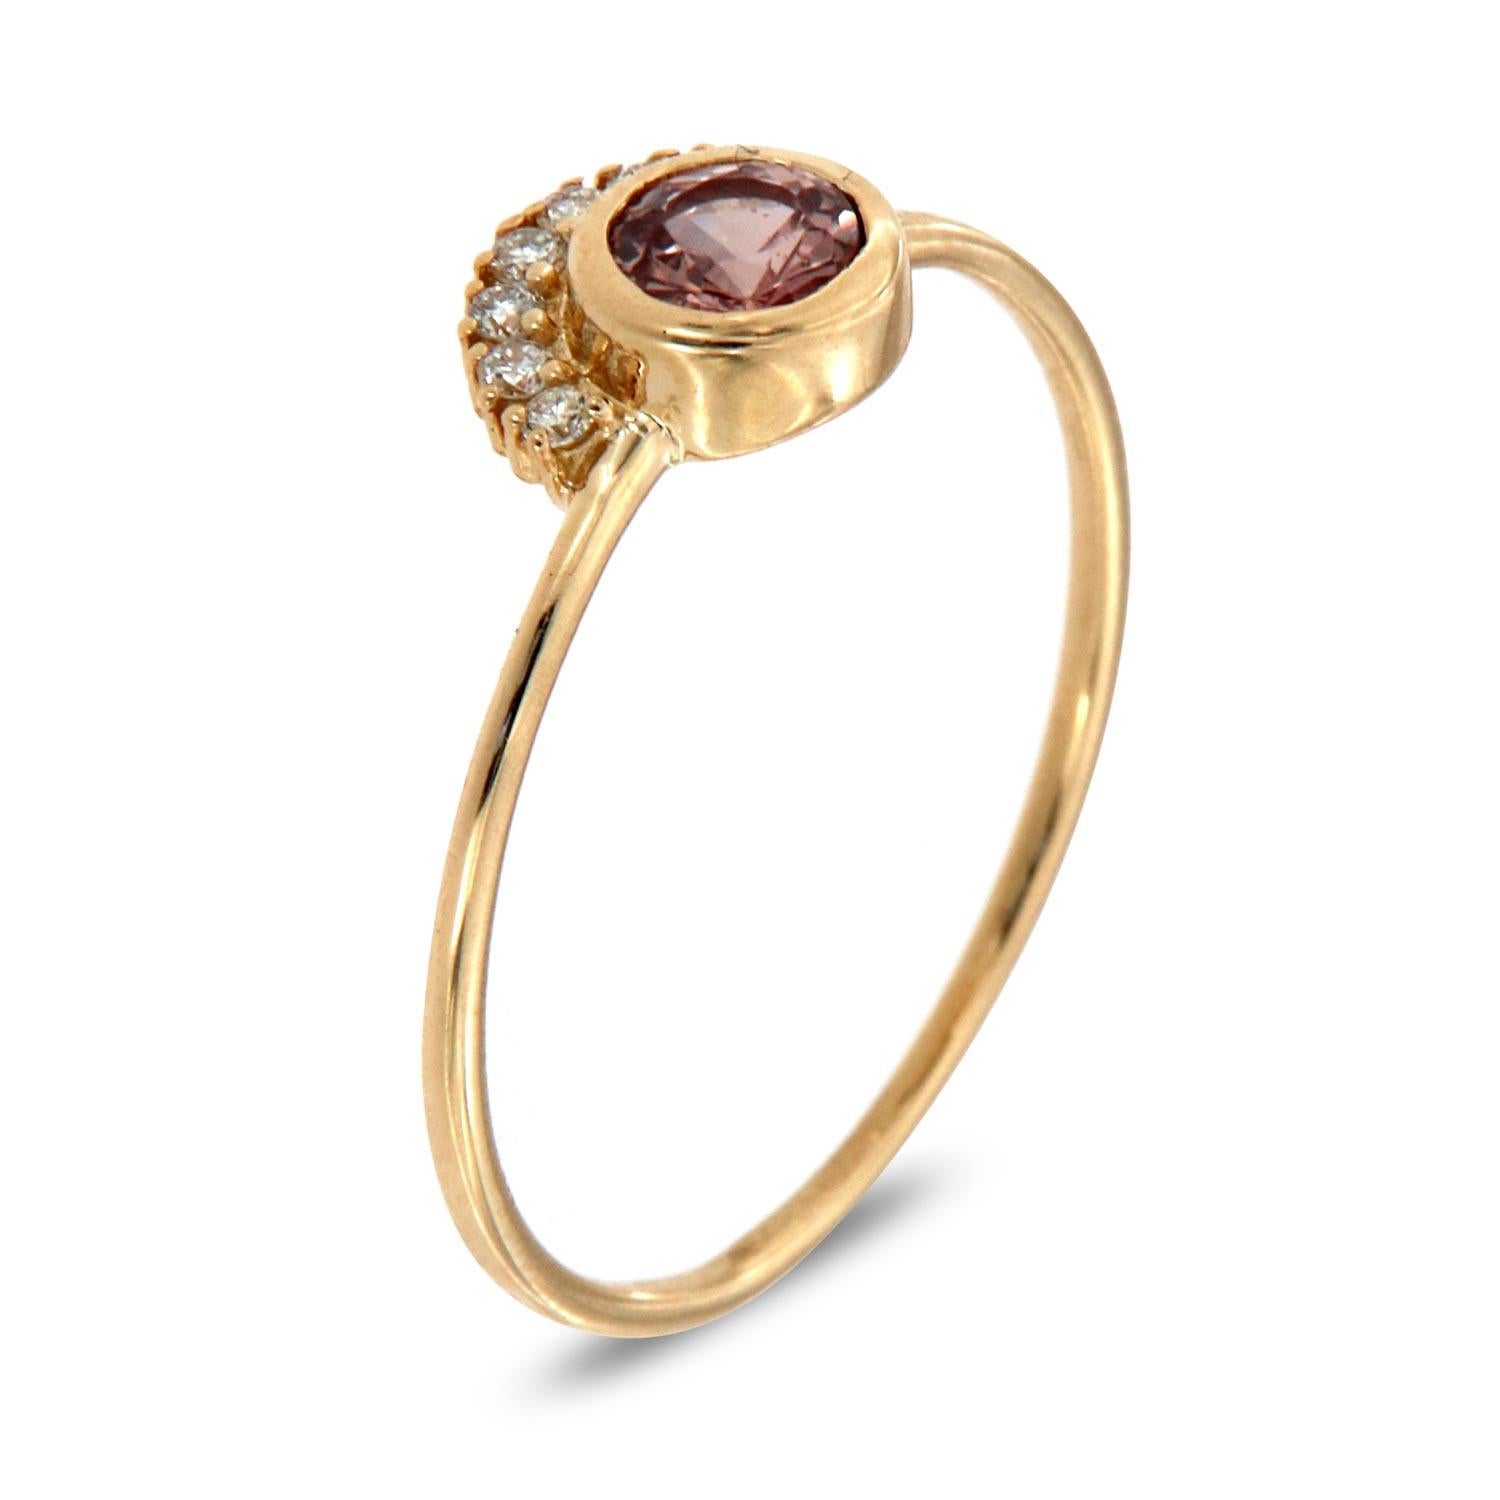 This petite fashion ring is impressive in its vintage appeal, featuring a bezeled natural pink round brilliant sapphire, accented with round brilliant diamonds. Experience the difference in person!

Product details: 

Center Gemstone Type: